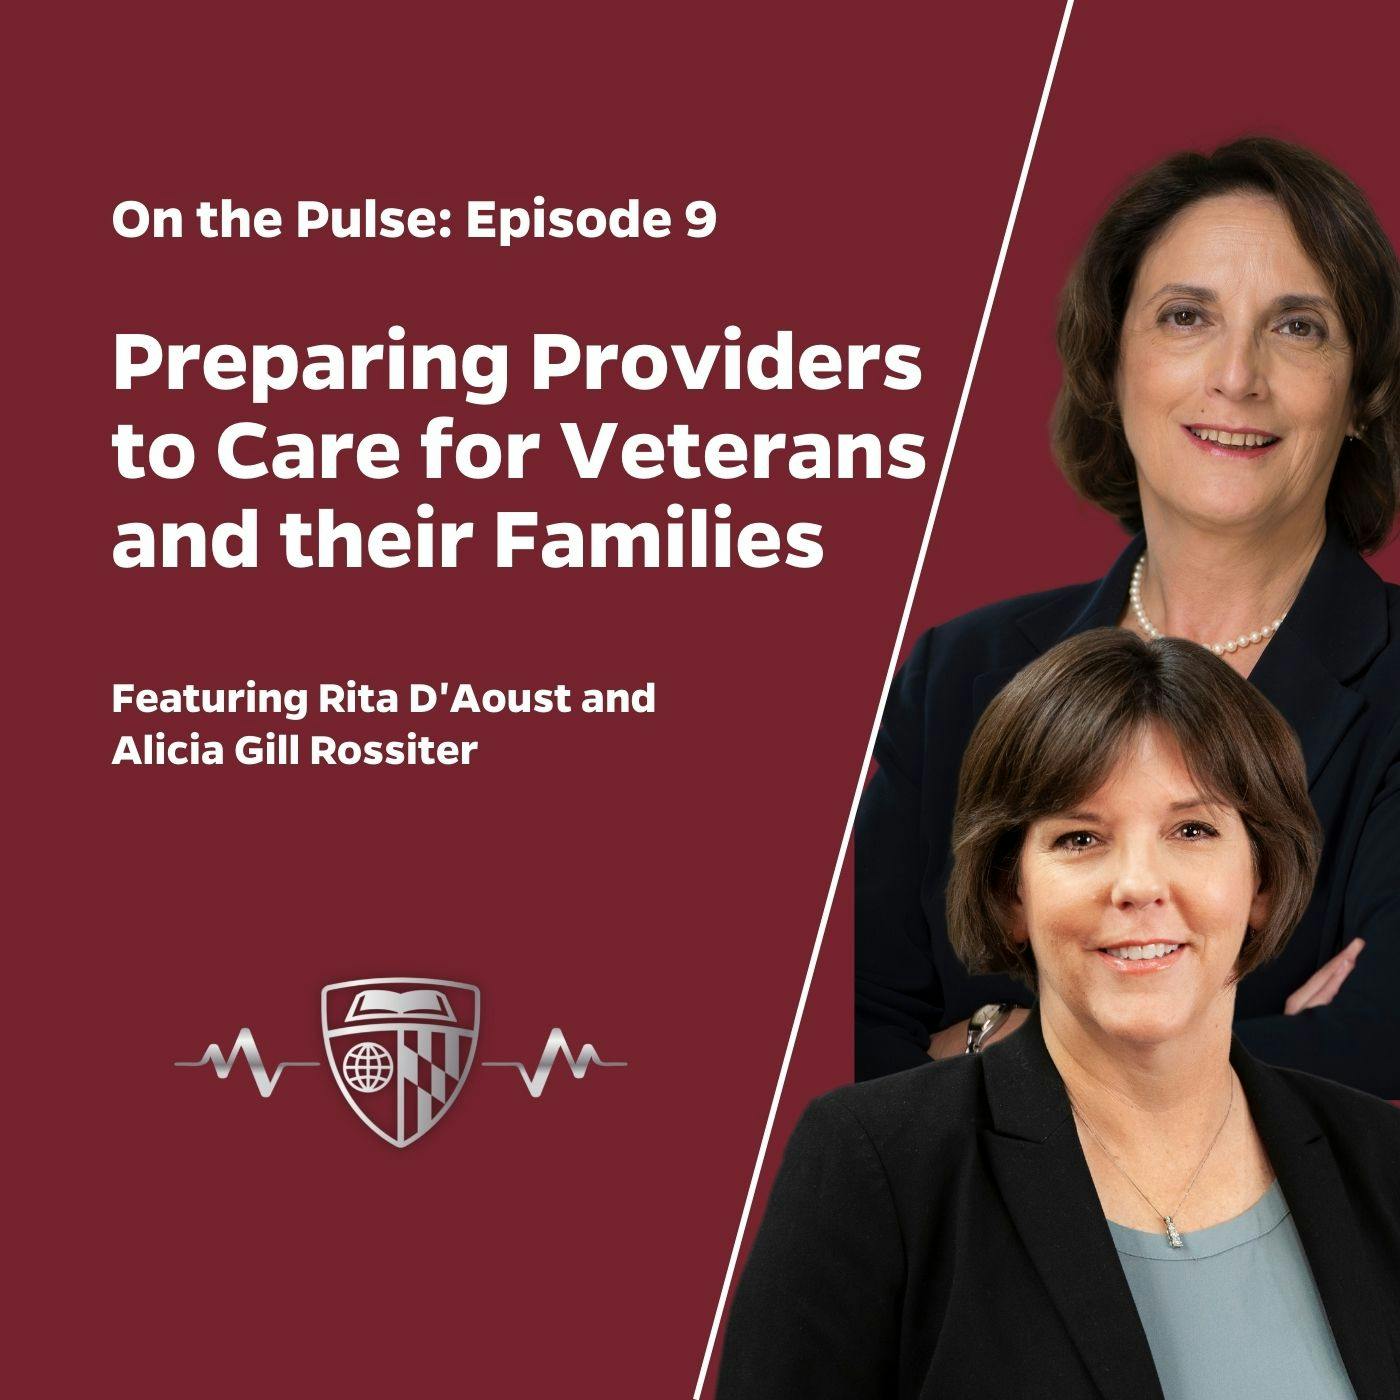 Episode 9: Preparing Providers to Care for Veterans and their Families